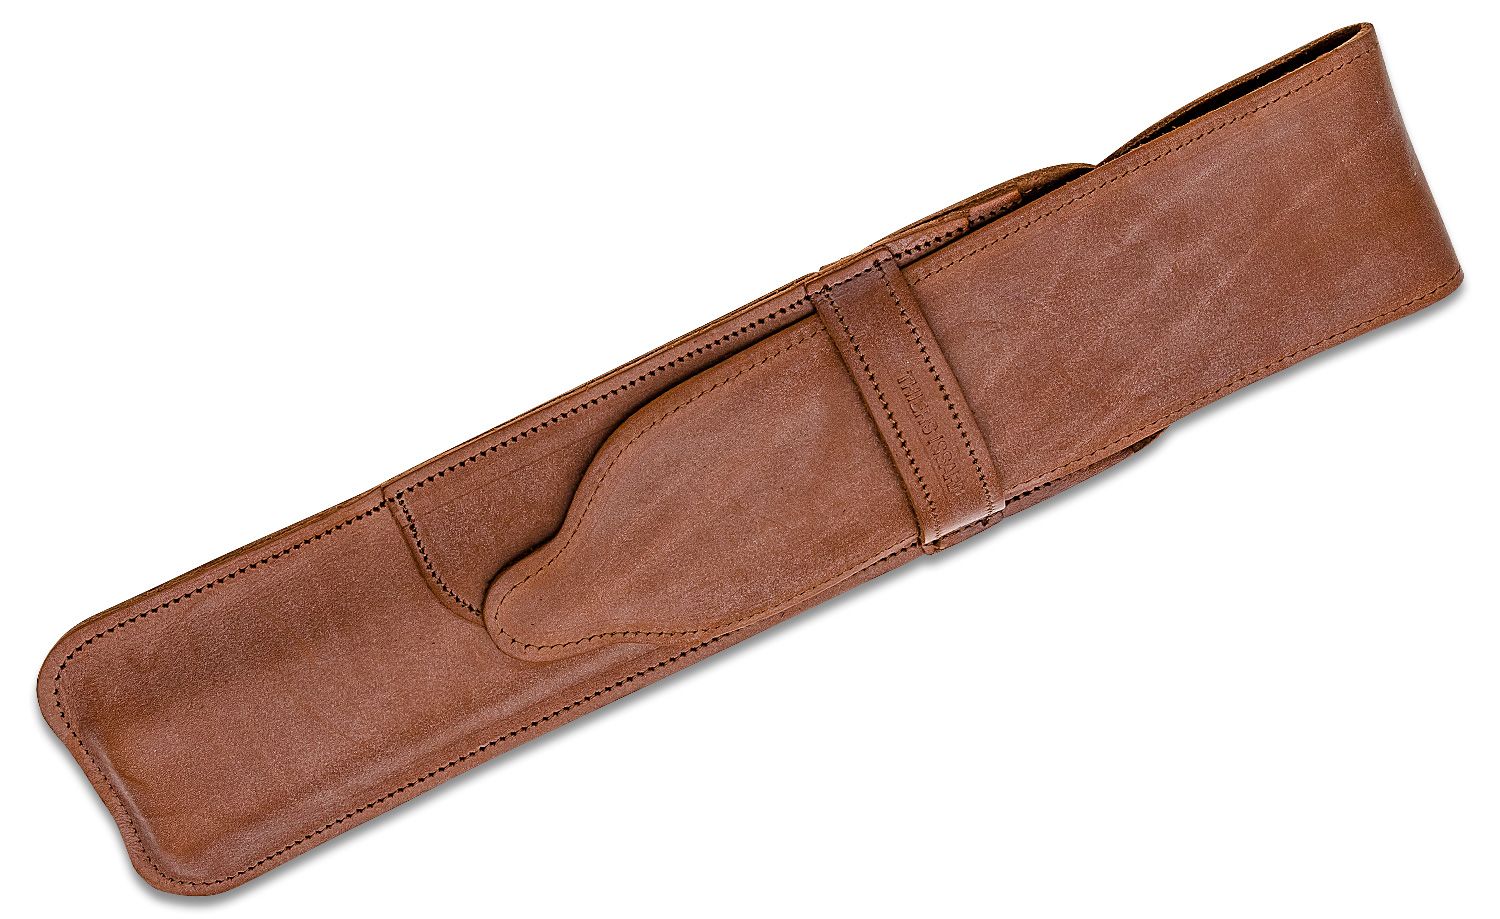 Illinois Razor Strop 2.5 inch x 23 inch Imperial Russia with Handle